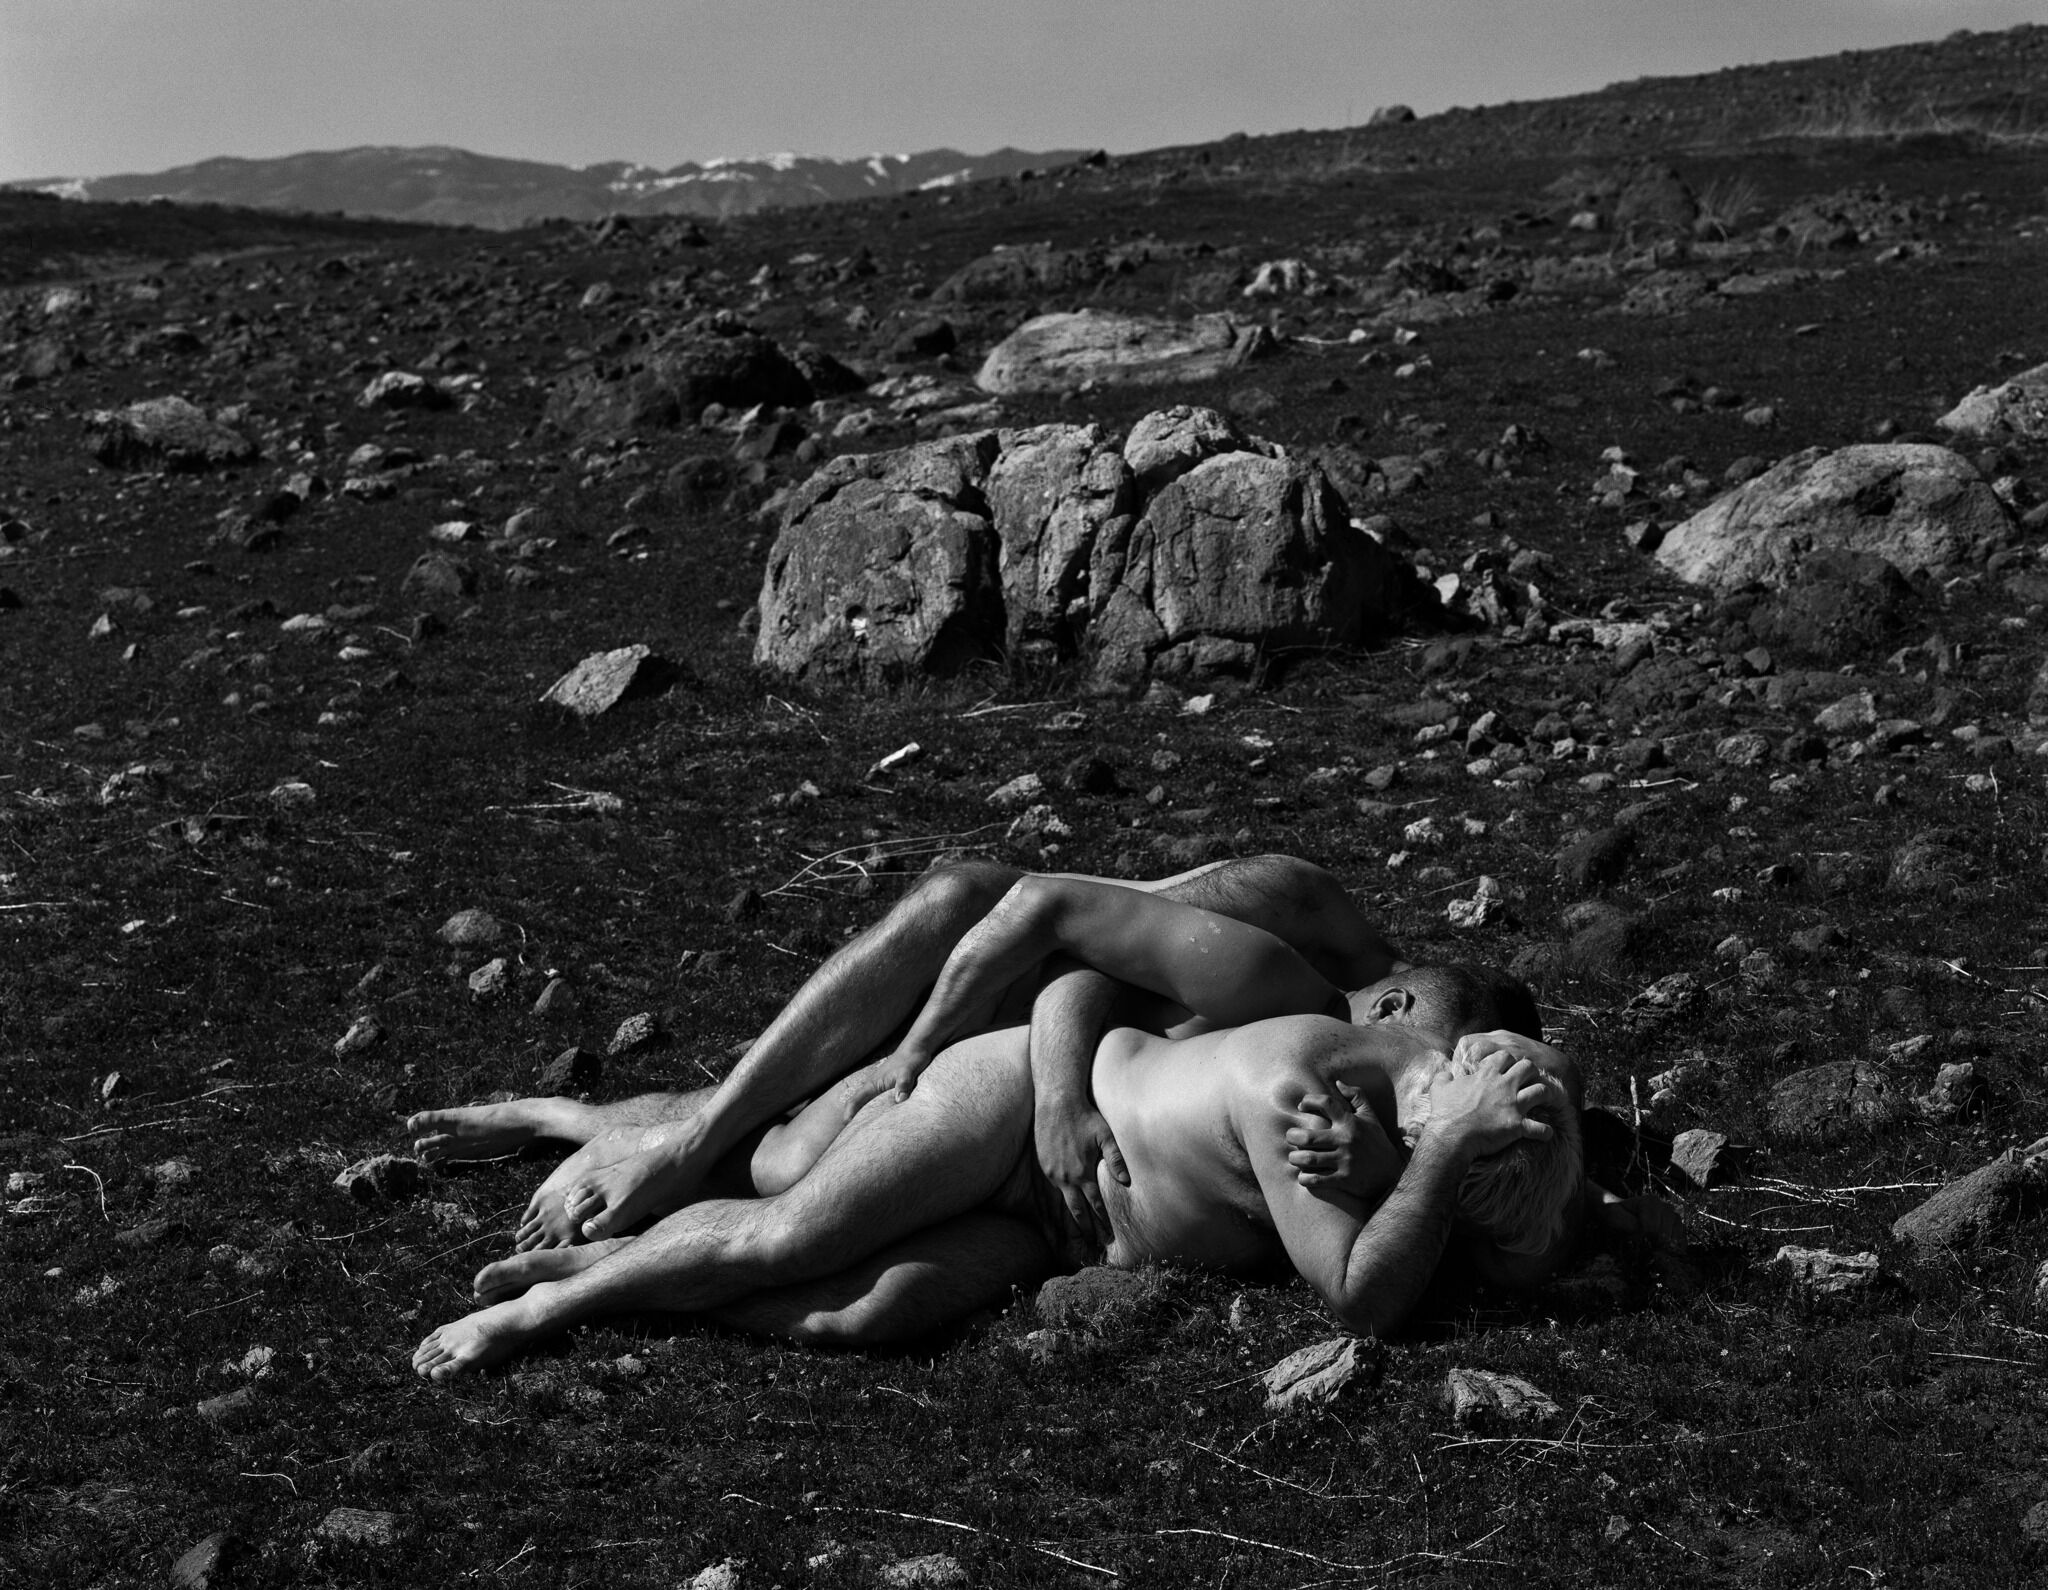 Two people embrace while lying on rocky terrain, with mountains in the background. The image is in black and white.